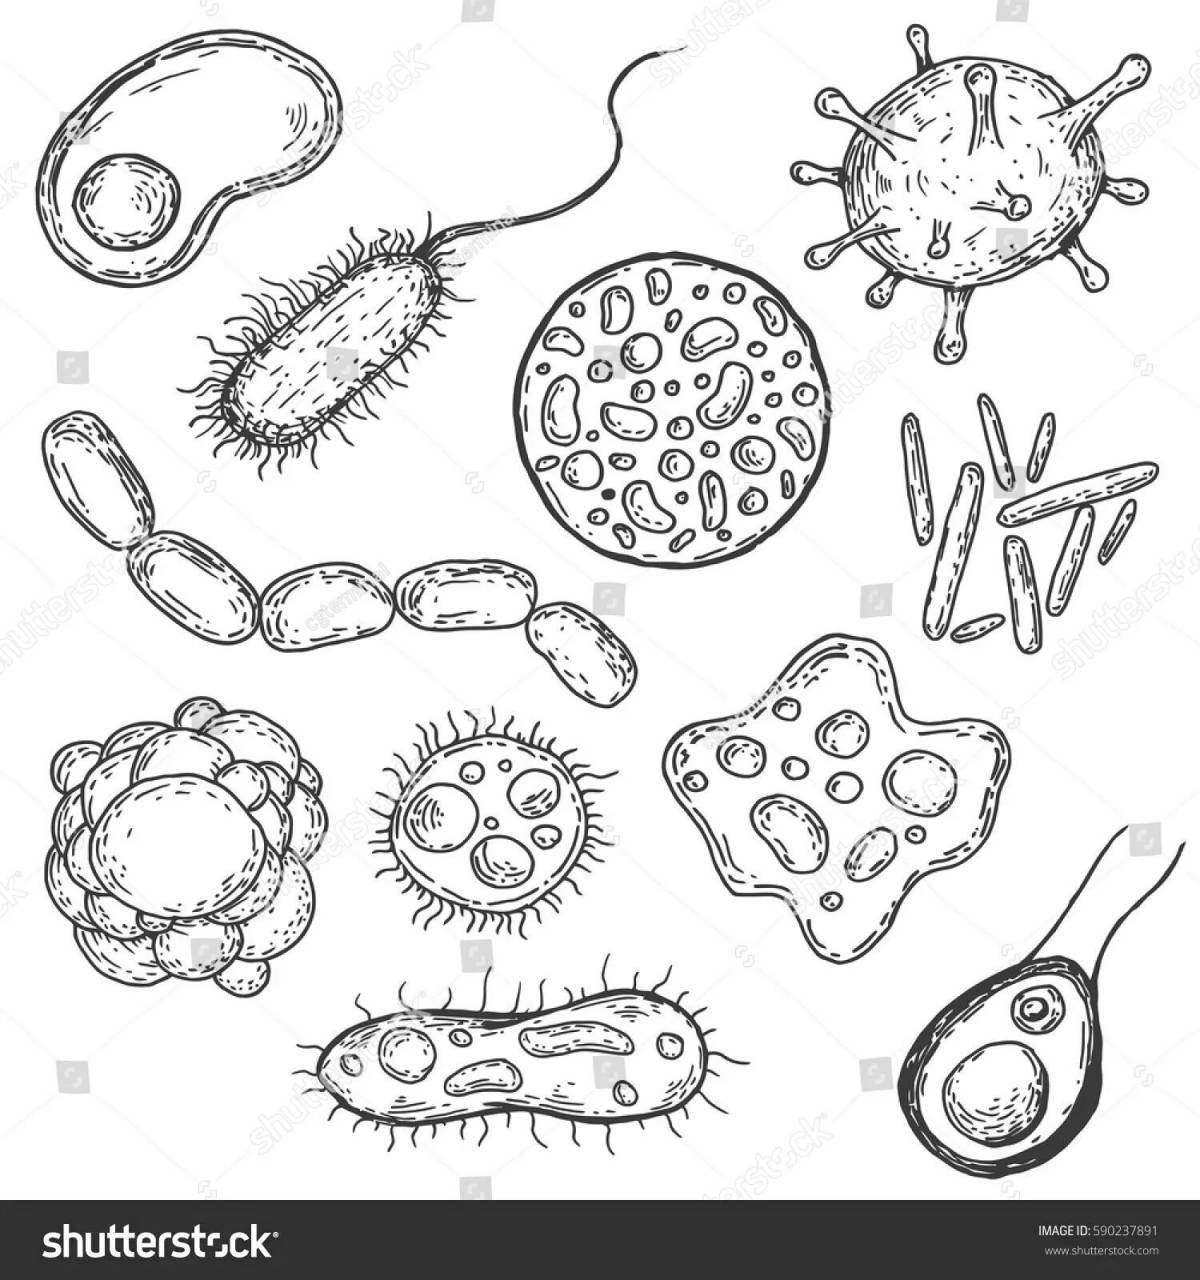 Creative bacteria coloring pages